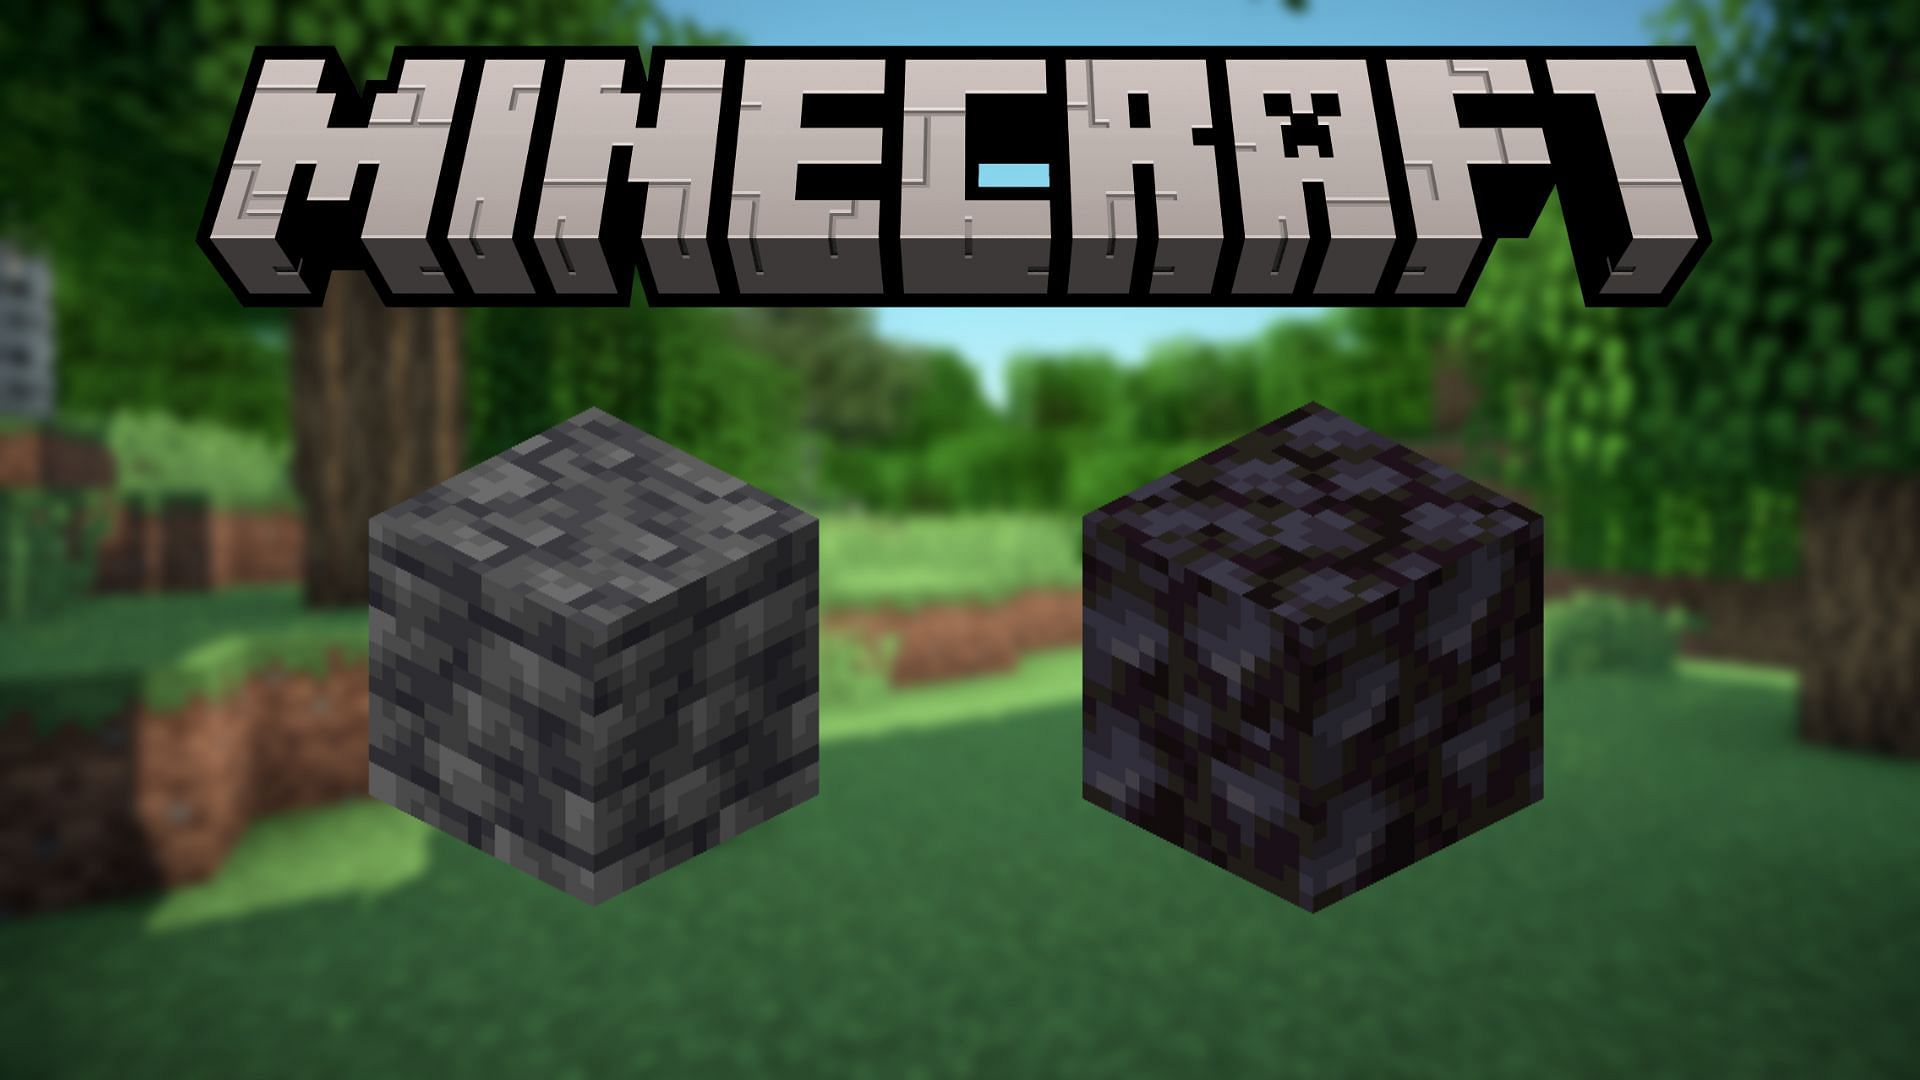 Blackstone and deepslate are both great building materials in Minecraft (Image via Mojang)